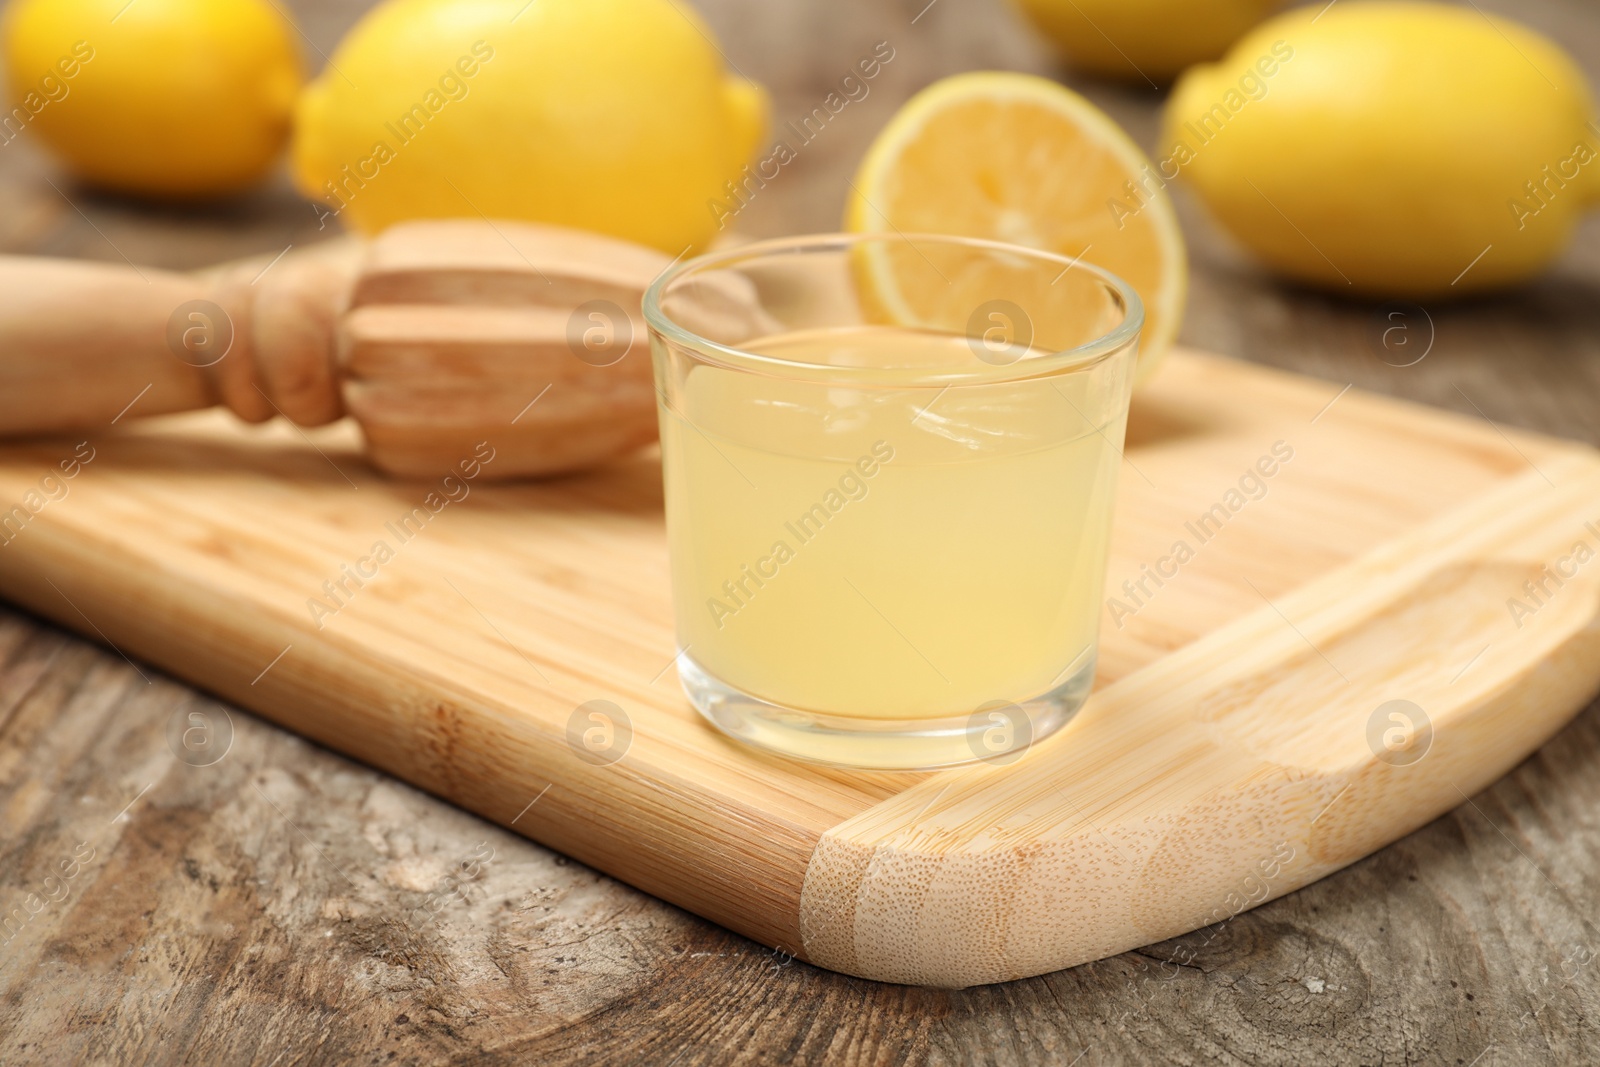 Photo of Wooden board with glass of freshly squeezed lemon juice and reamer on table